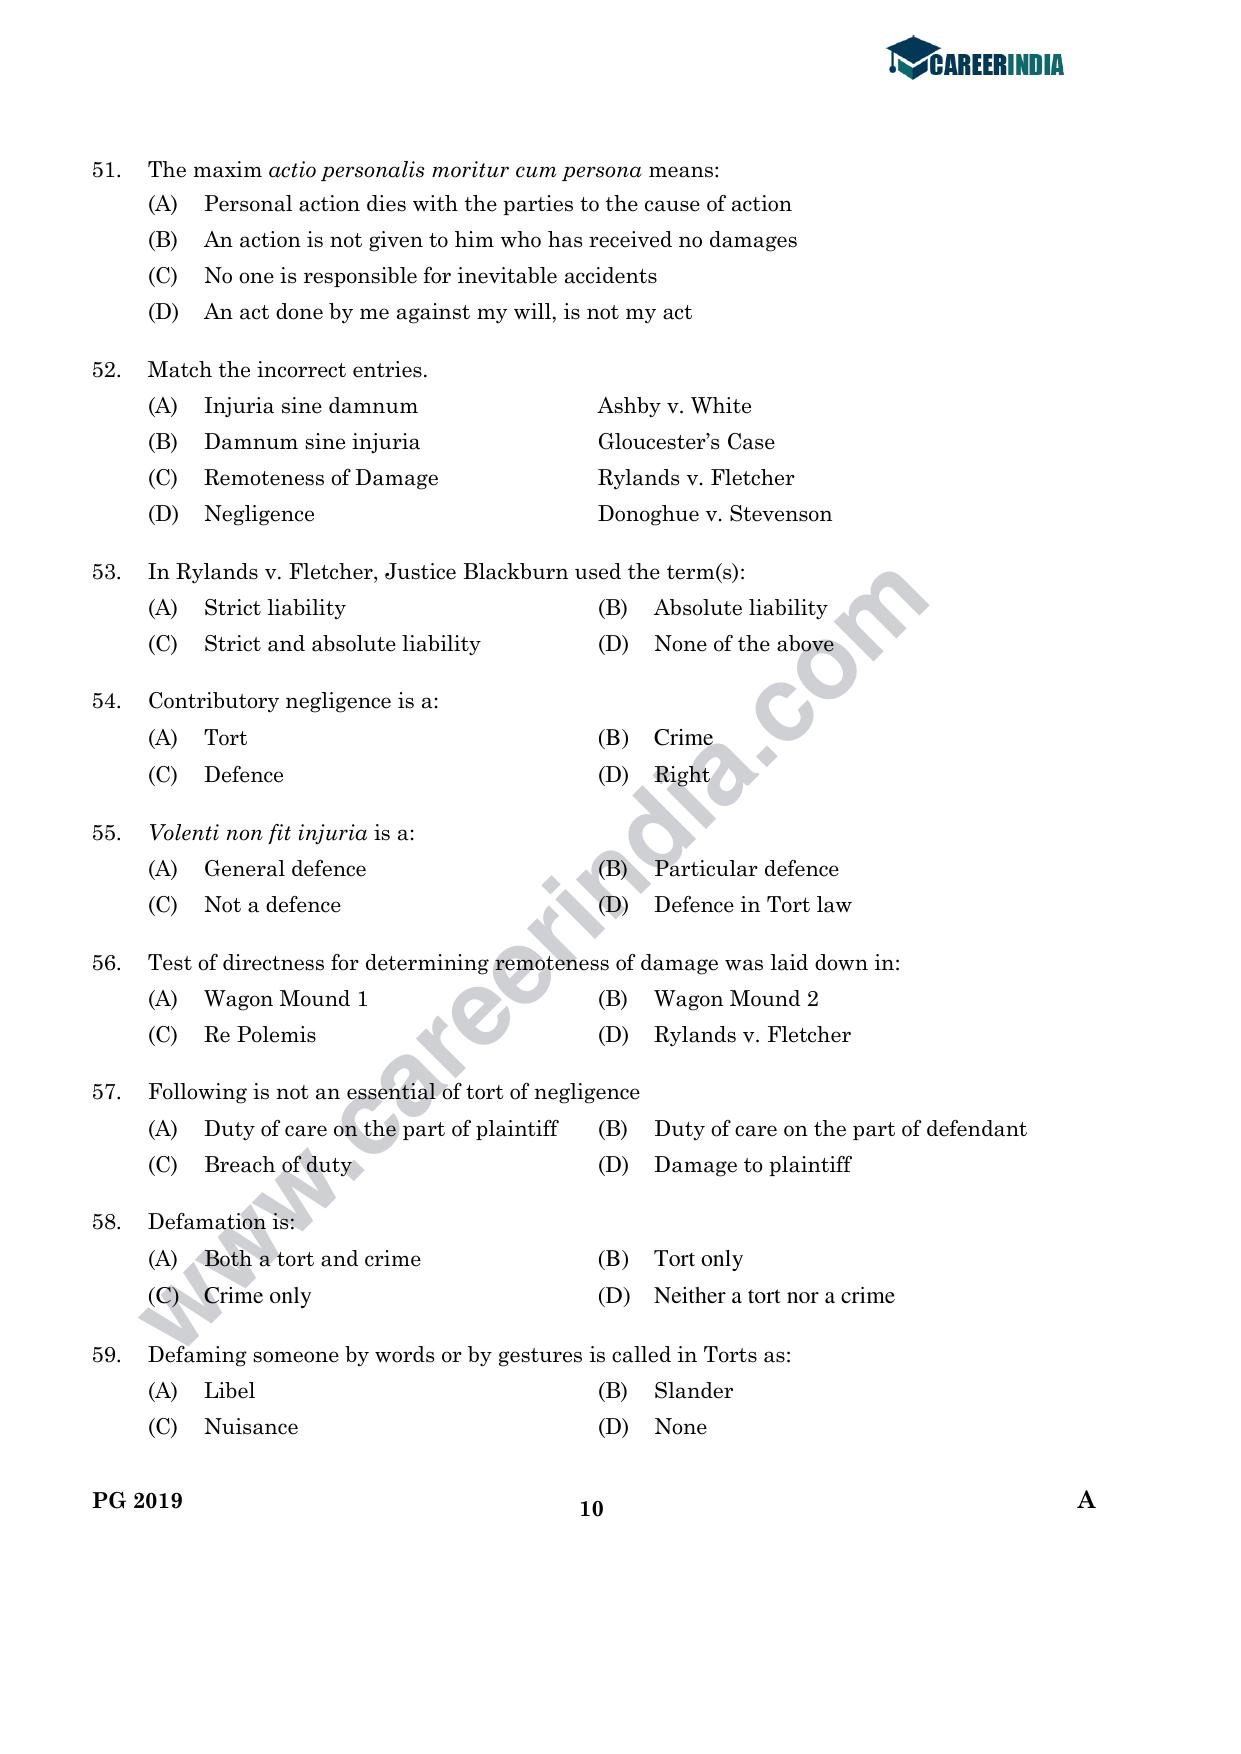 CLAT 2019 PG A-Series Question Papers (C.L.A.) - Page 9